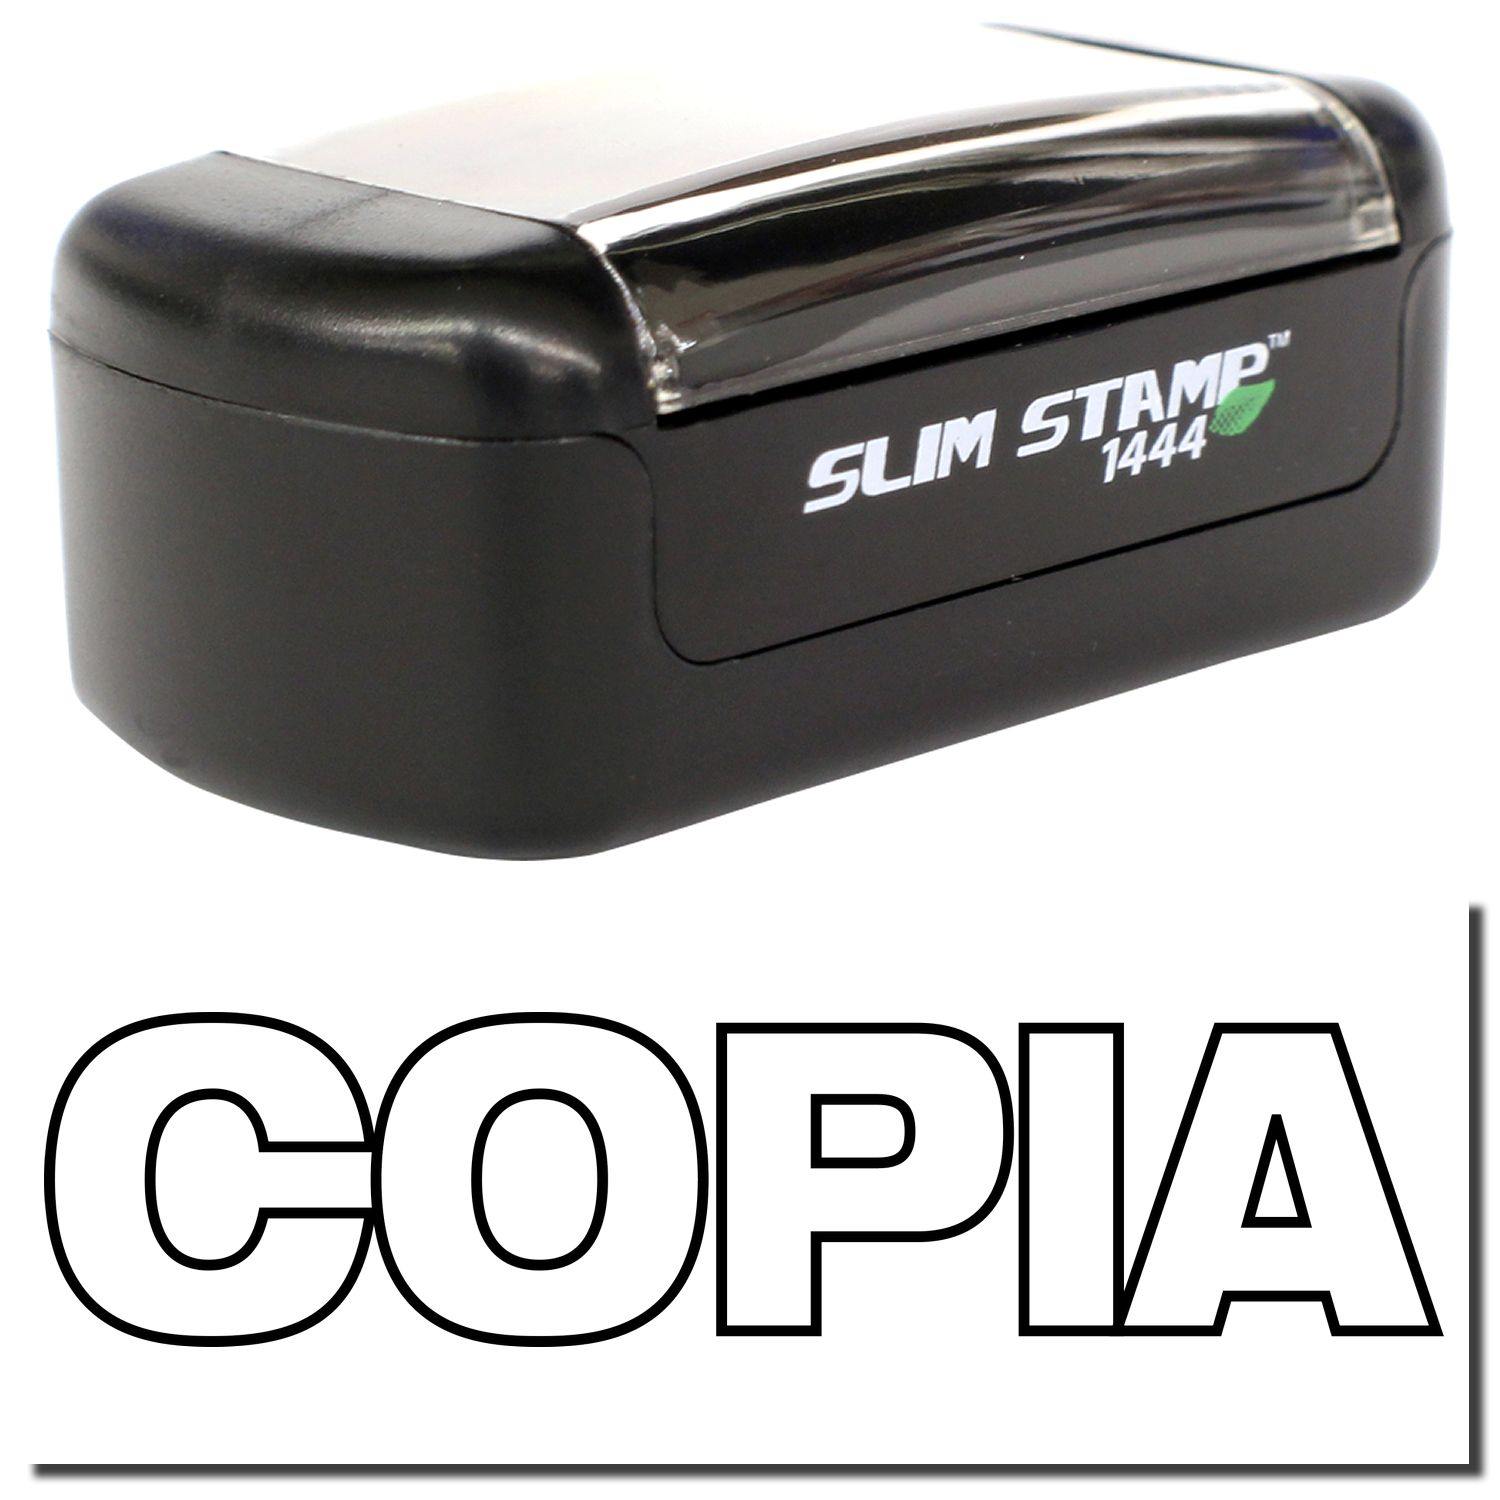 A stock office pre-inked stamp with a stamped image showing how the text "COPIA" in an outline font is displayed after stamping.